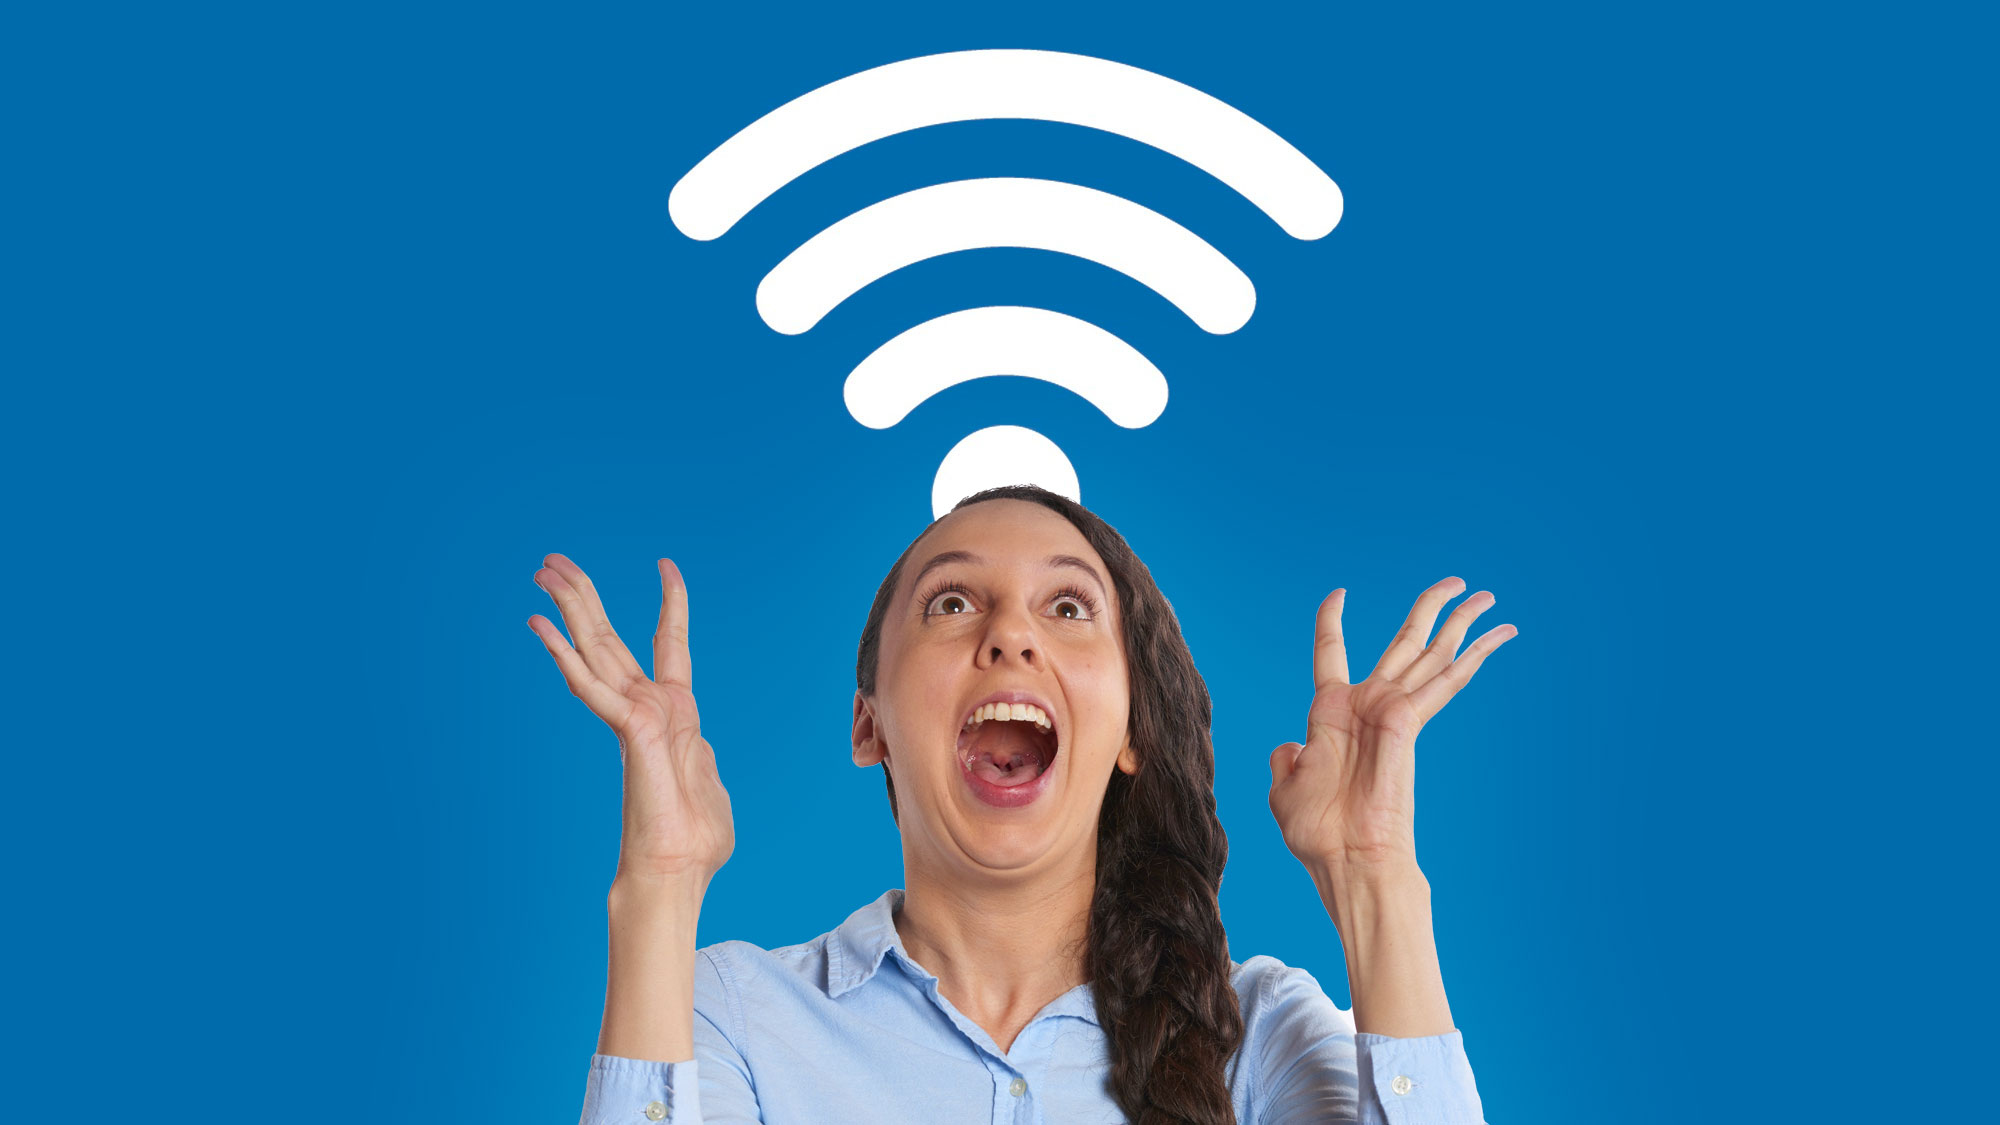 101 Funny WiFi Network Names To Harass And Entertain Your Neighbors